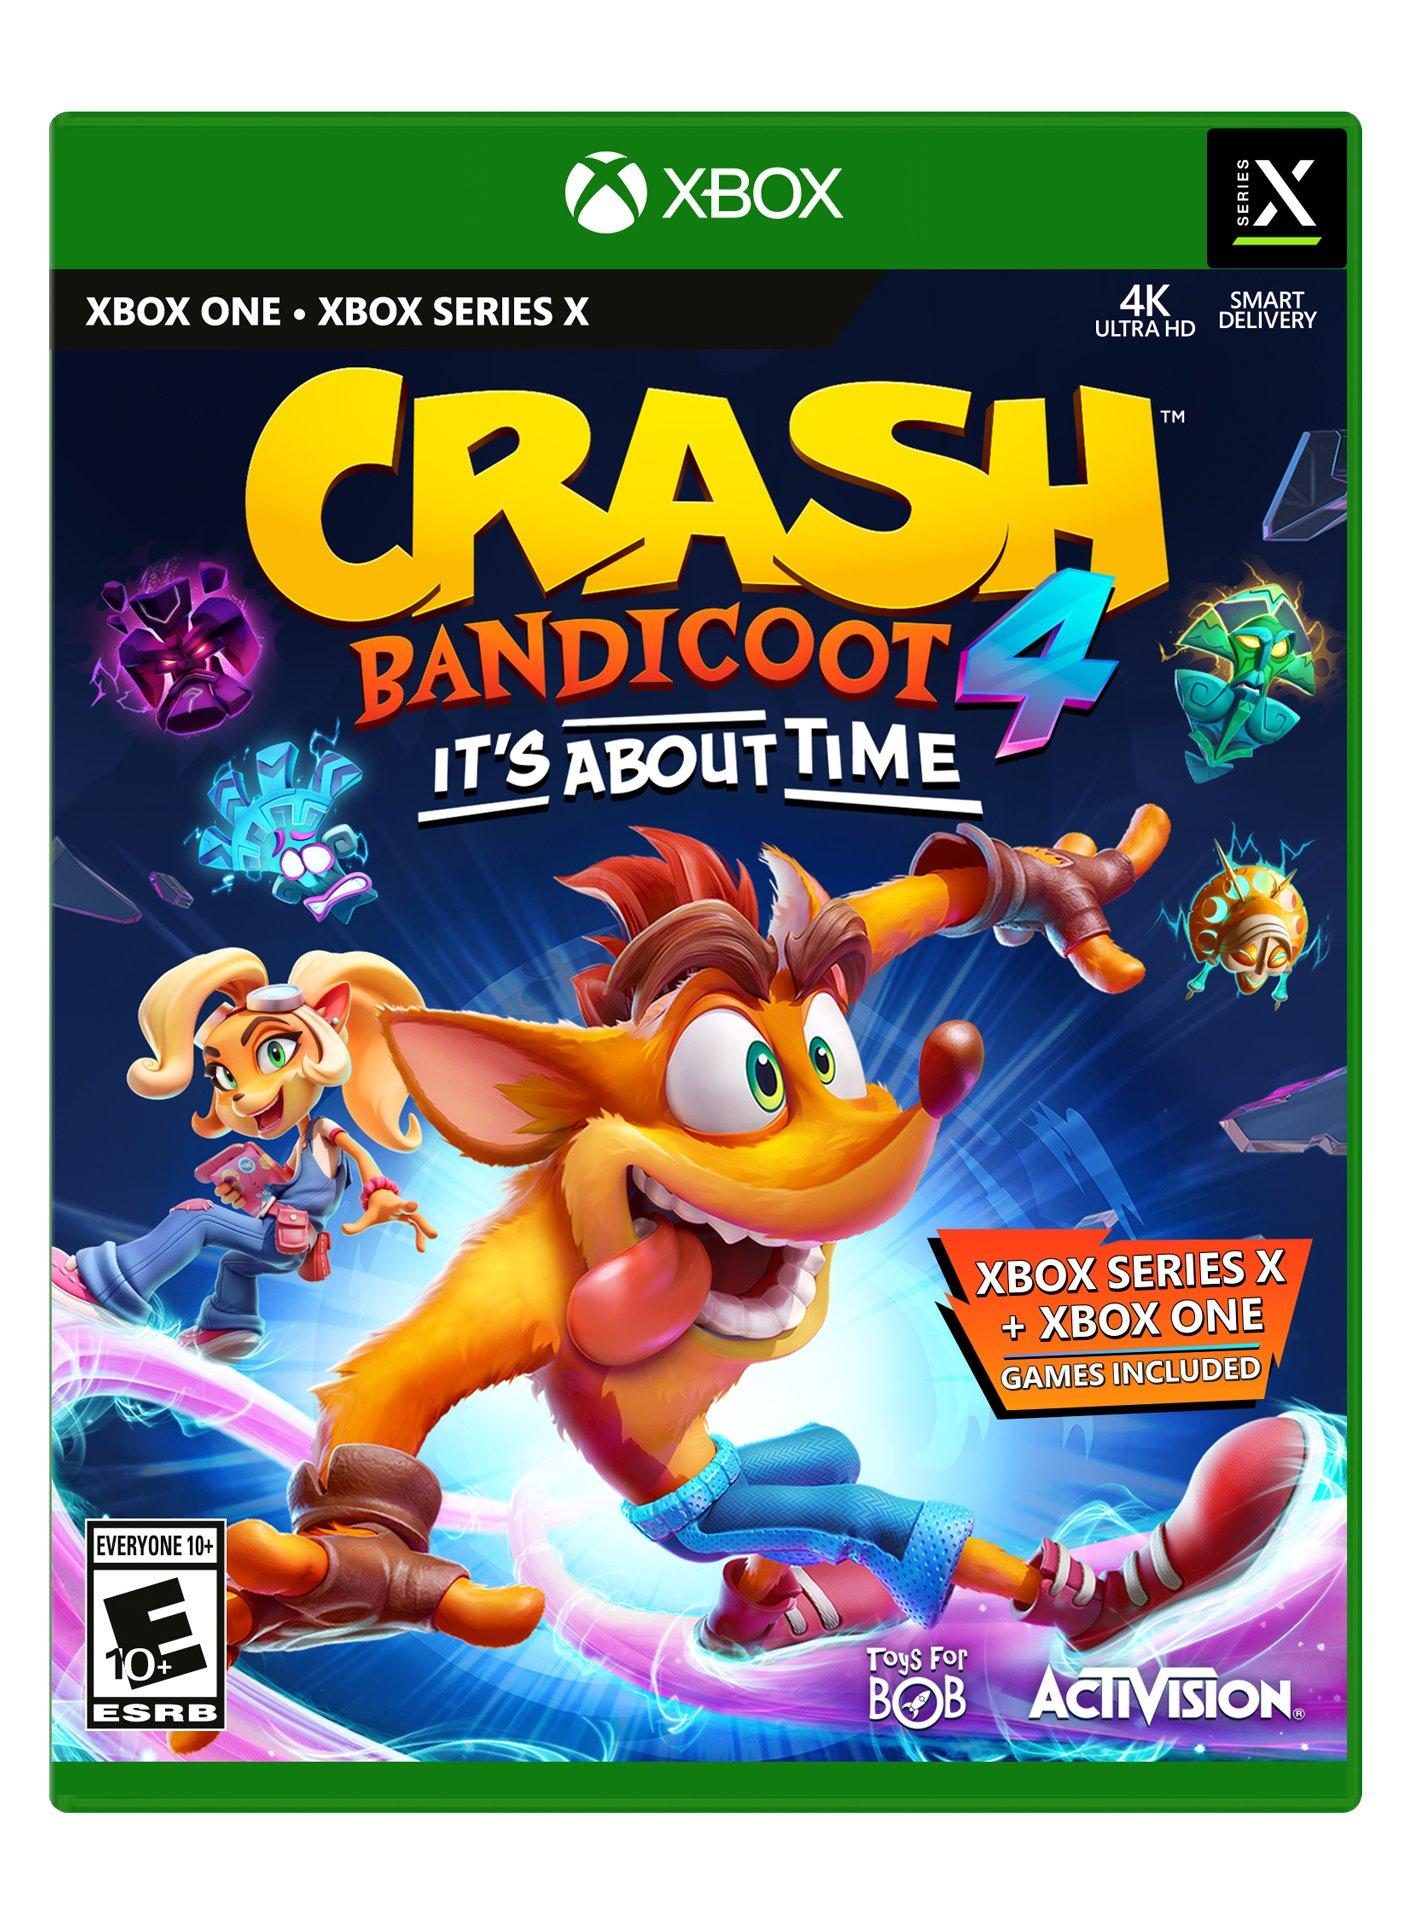 Crash Bandicoot 4 Hits PS5, Xbox Series X, Switch and PC on March 2021 -  MP1st